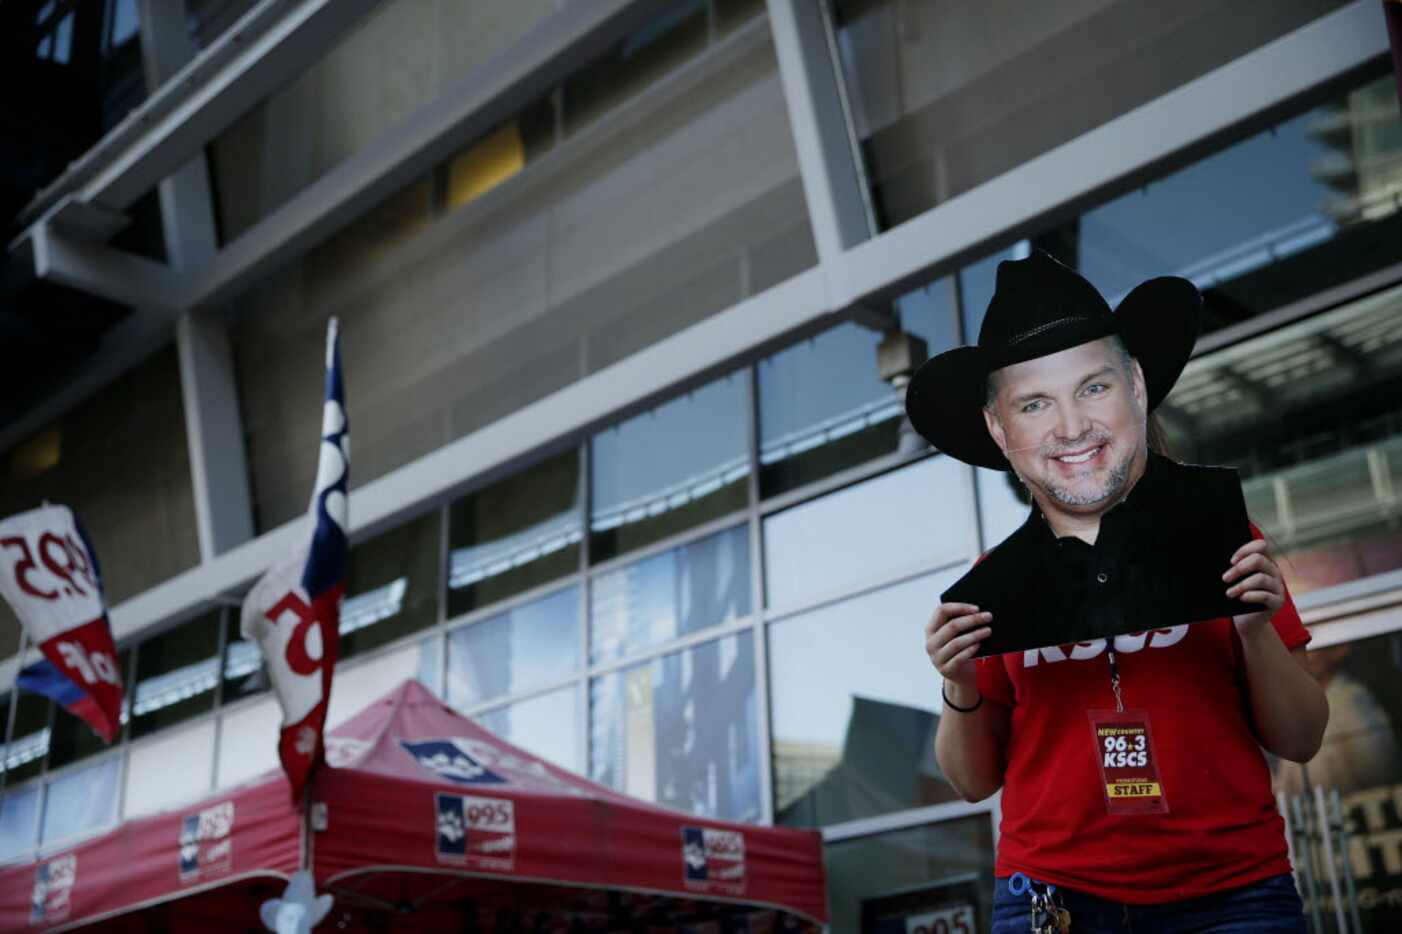 Radio employee Meagan Mahaffey poses with a poster of Garth Brooks in the plaza before...